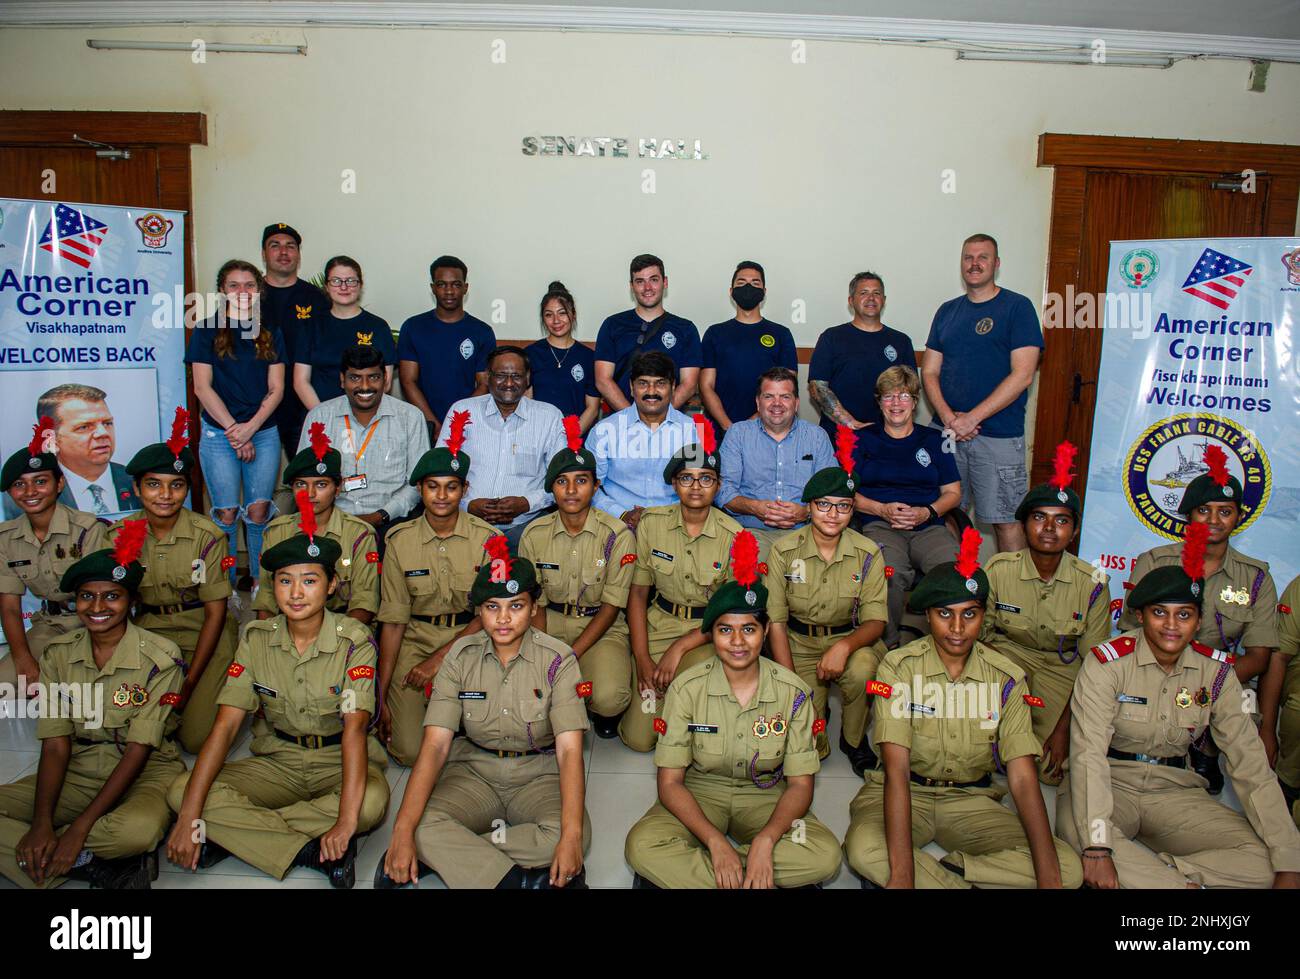 VISAKHAPATNAM, India (Aug. 3, 2022) – David Moyer, public affairs officer for U.S. Consulate General Hyderabad, Prasad Reddy, Vice Chancellor of Andhra University, Sailors assigned to the Emory S. Land-class submarine tender USS Frank Cable (AS 40), female cadets from the National Cadet Corps, and university staff pose for a group photo during a community outreach event at Andhra University in Visakhapatnam, India, Aug. 3, 2022. Frank Cable is currently on patrol conducting expeditionary maintenance and logistics in the 7th Fleet area of operations in support of a free and open Indo-Pacific. Stock Photo